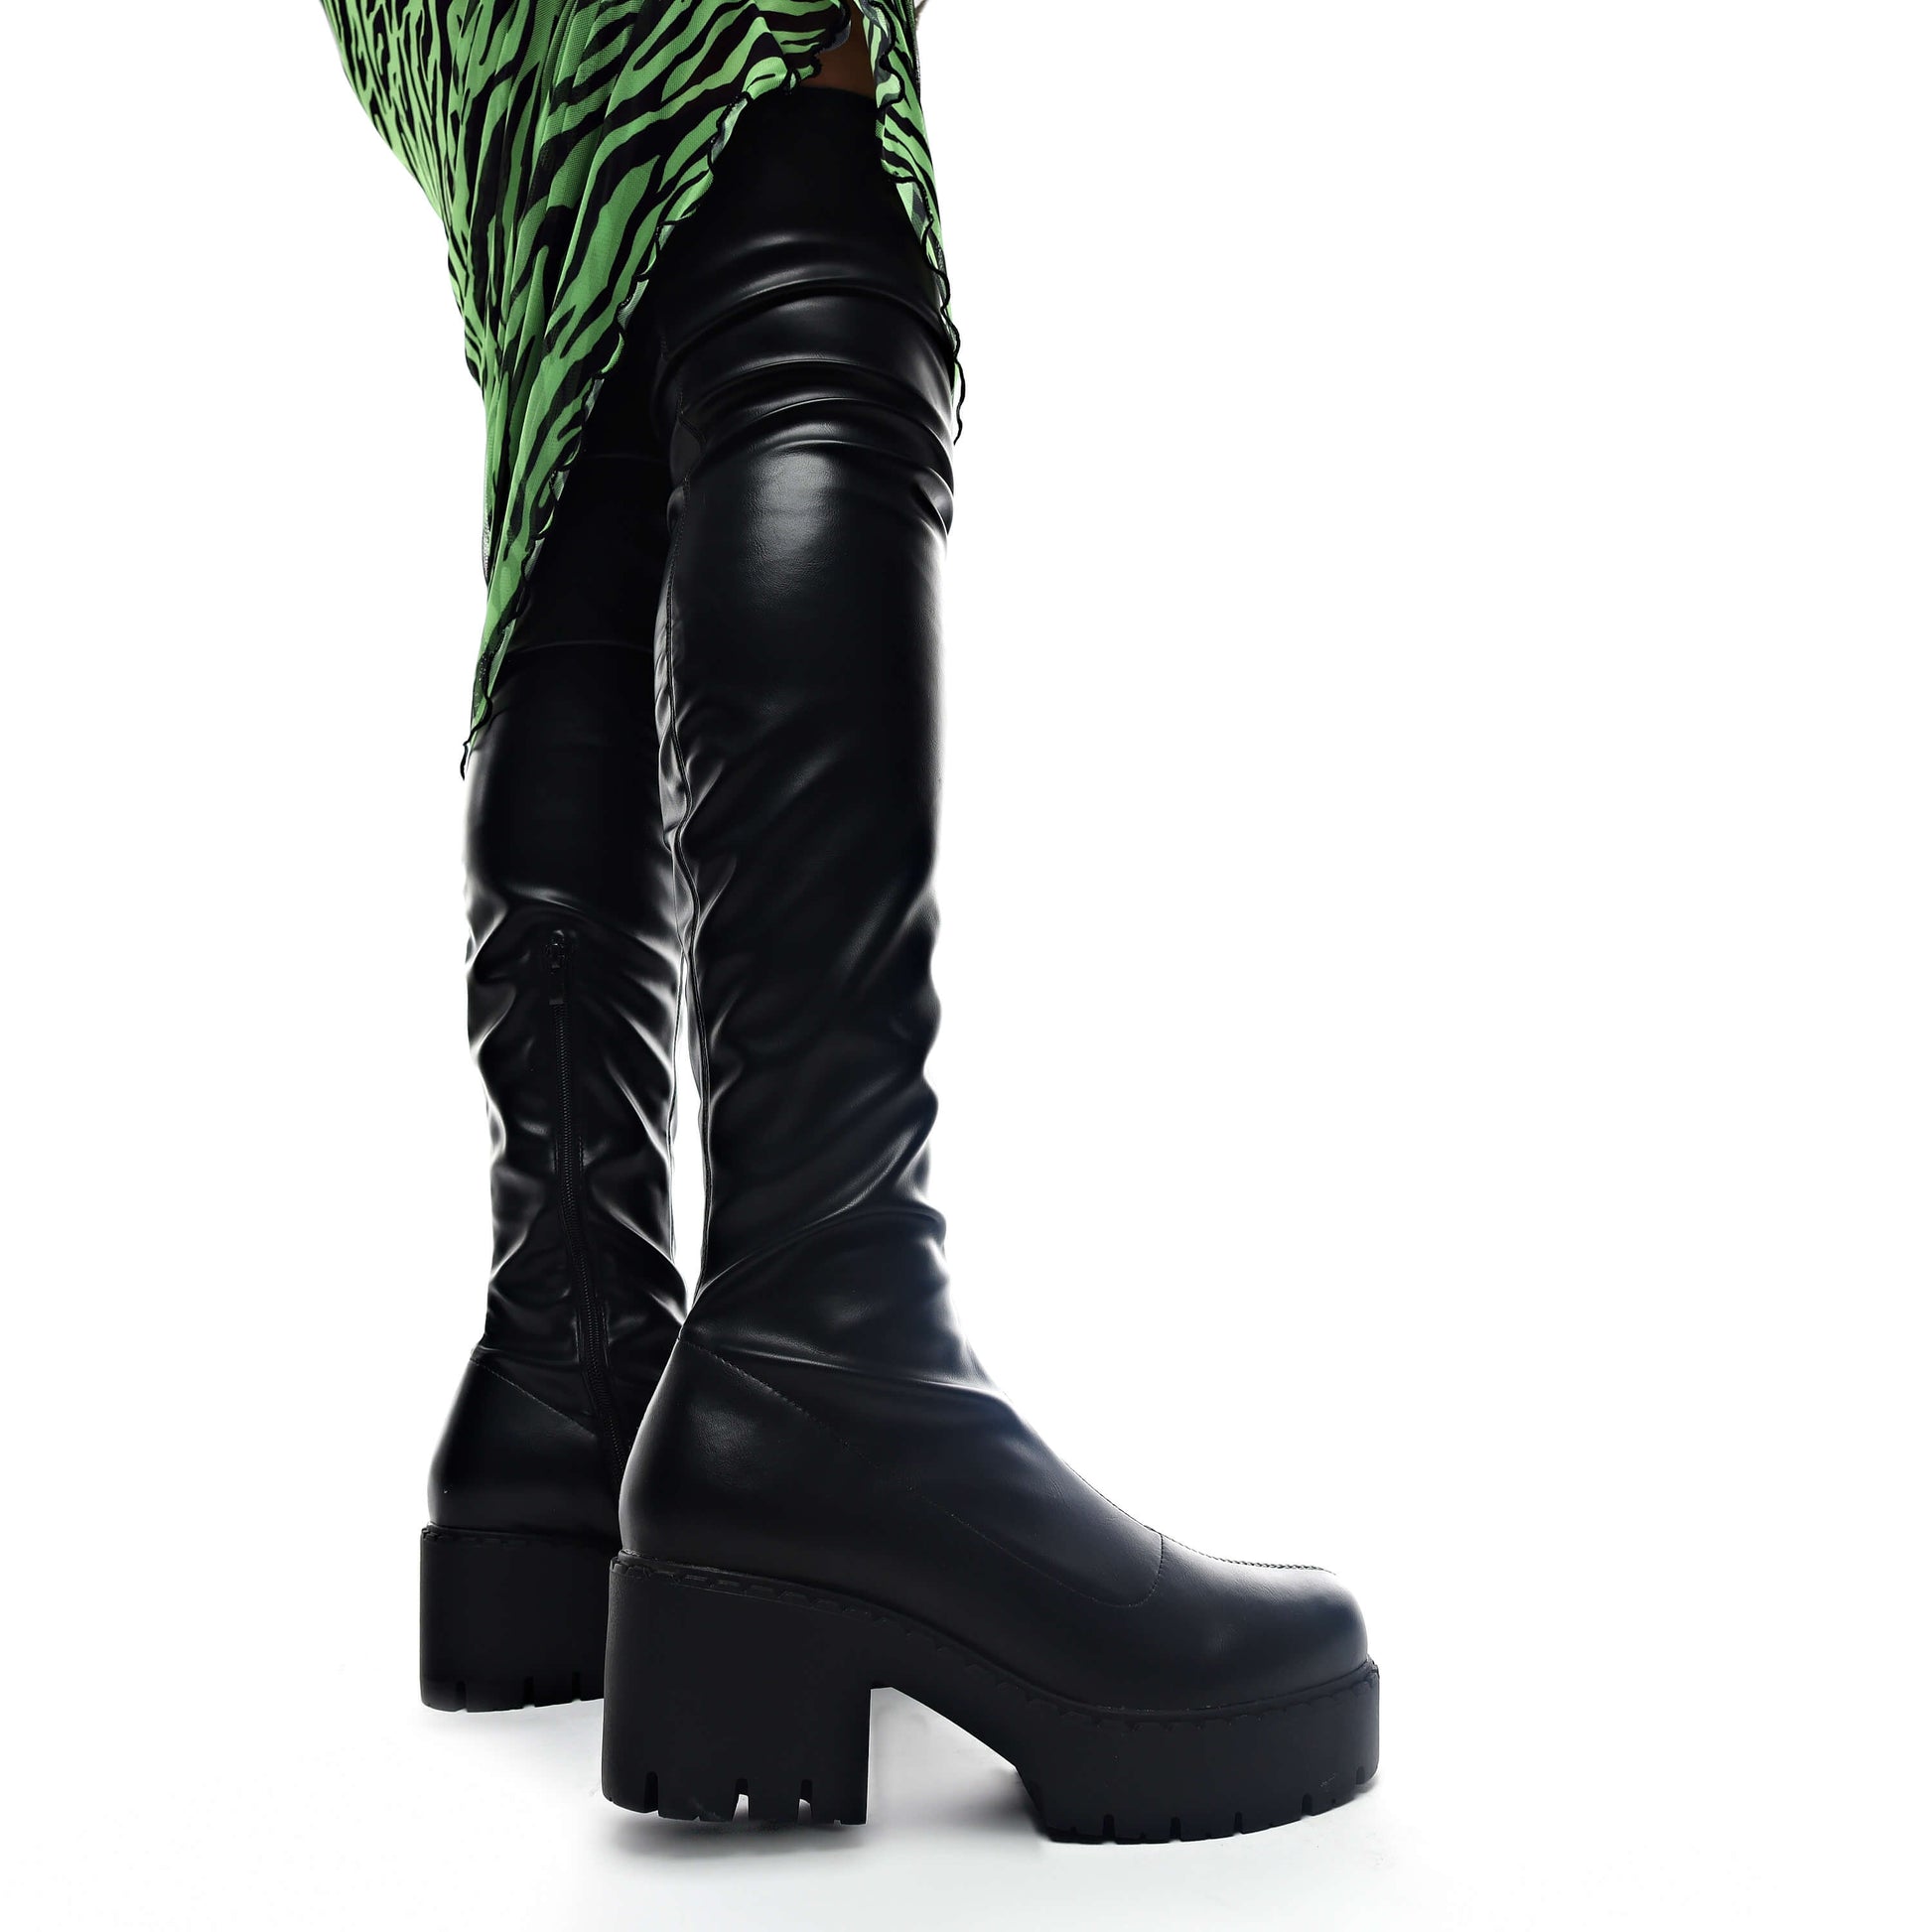 The Harmony Stretch Thigh High Boots - Long Boots - KOI Footwear - Black - Model Side View